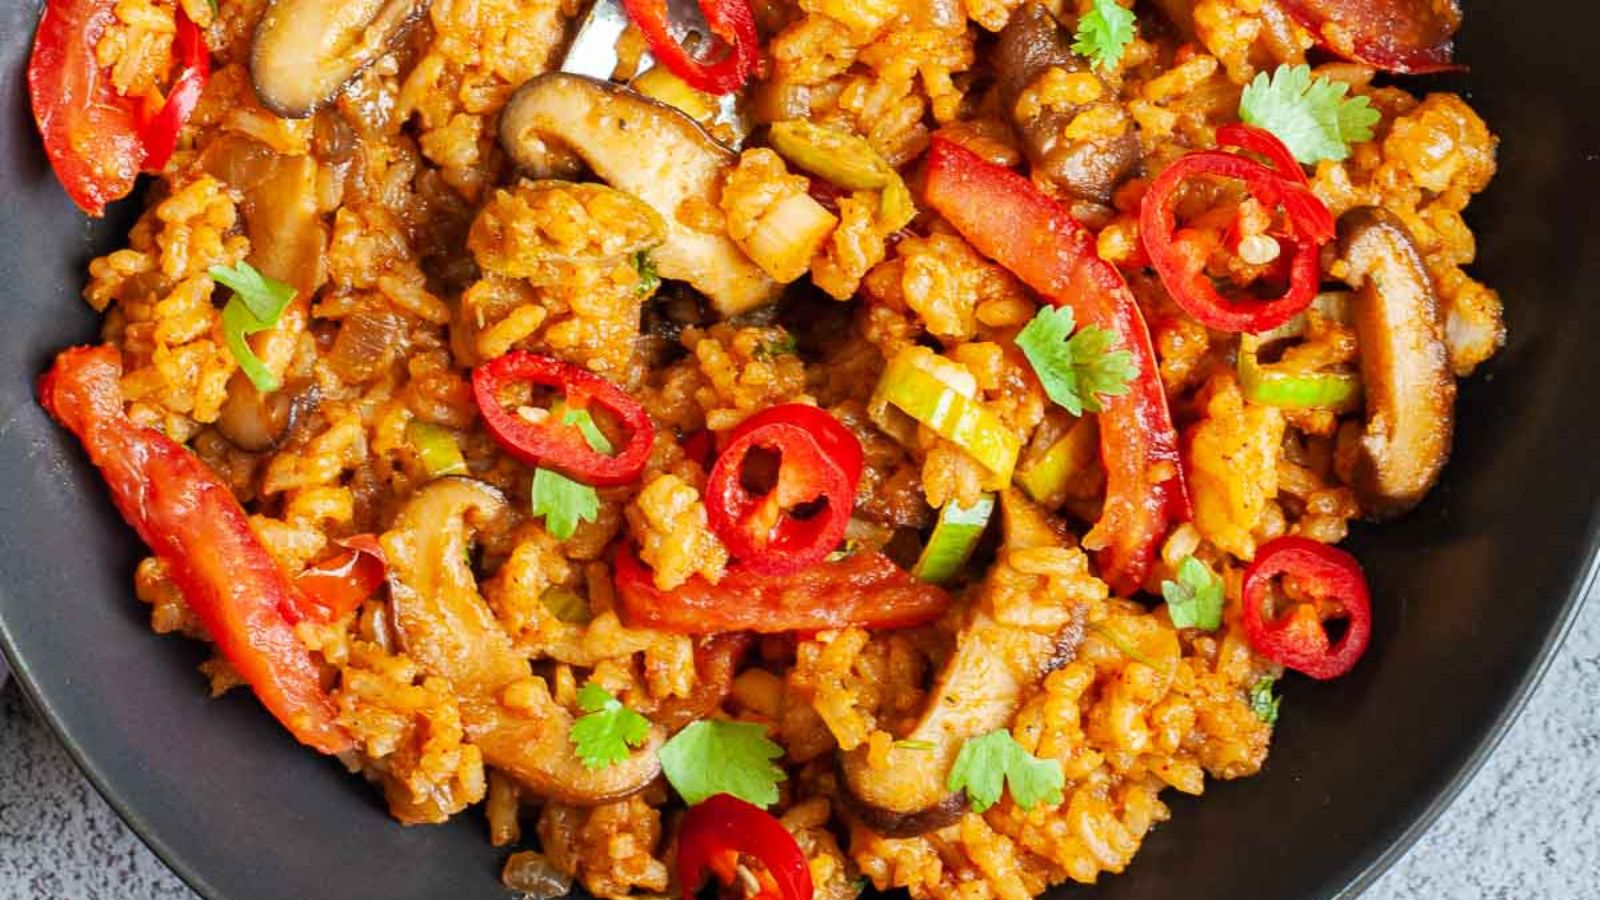 20 Spicy Recipes That Don’t Require a Ton of Hot Sauce